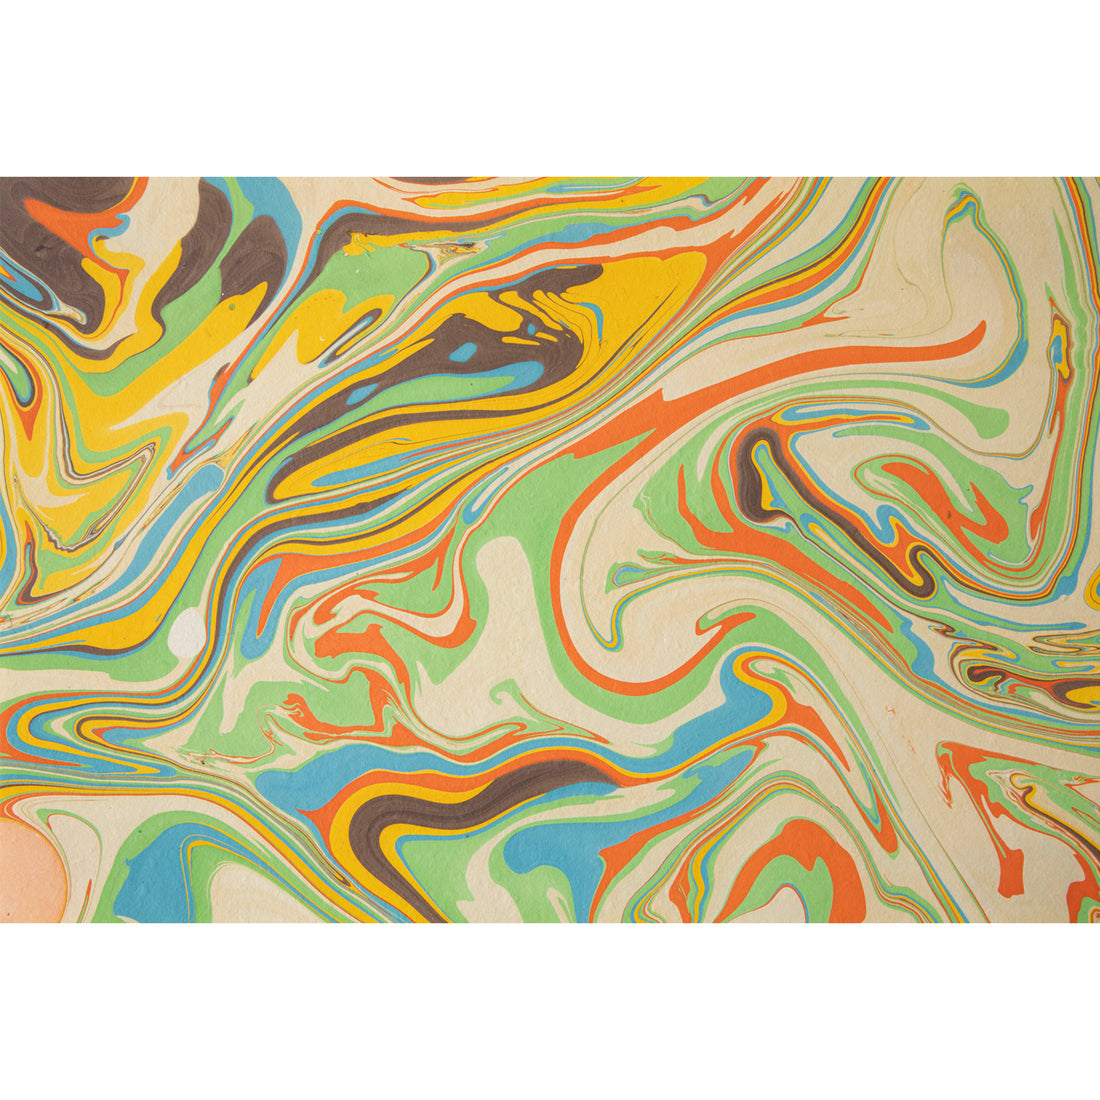 An abstract, marbled pattern of cream, orange, yellow, mint green, blue and brown swirled randomly together in a mesmerizing flow.